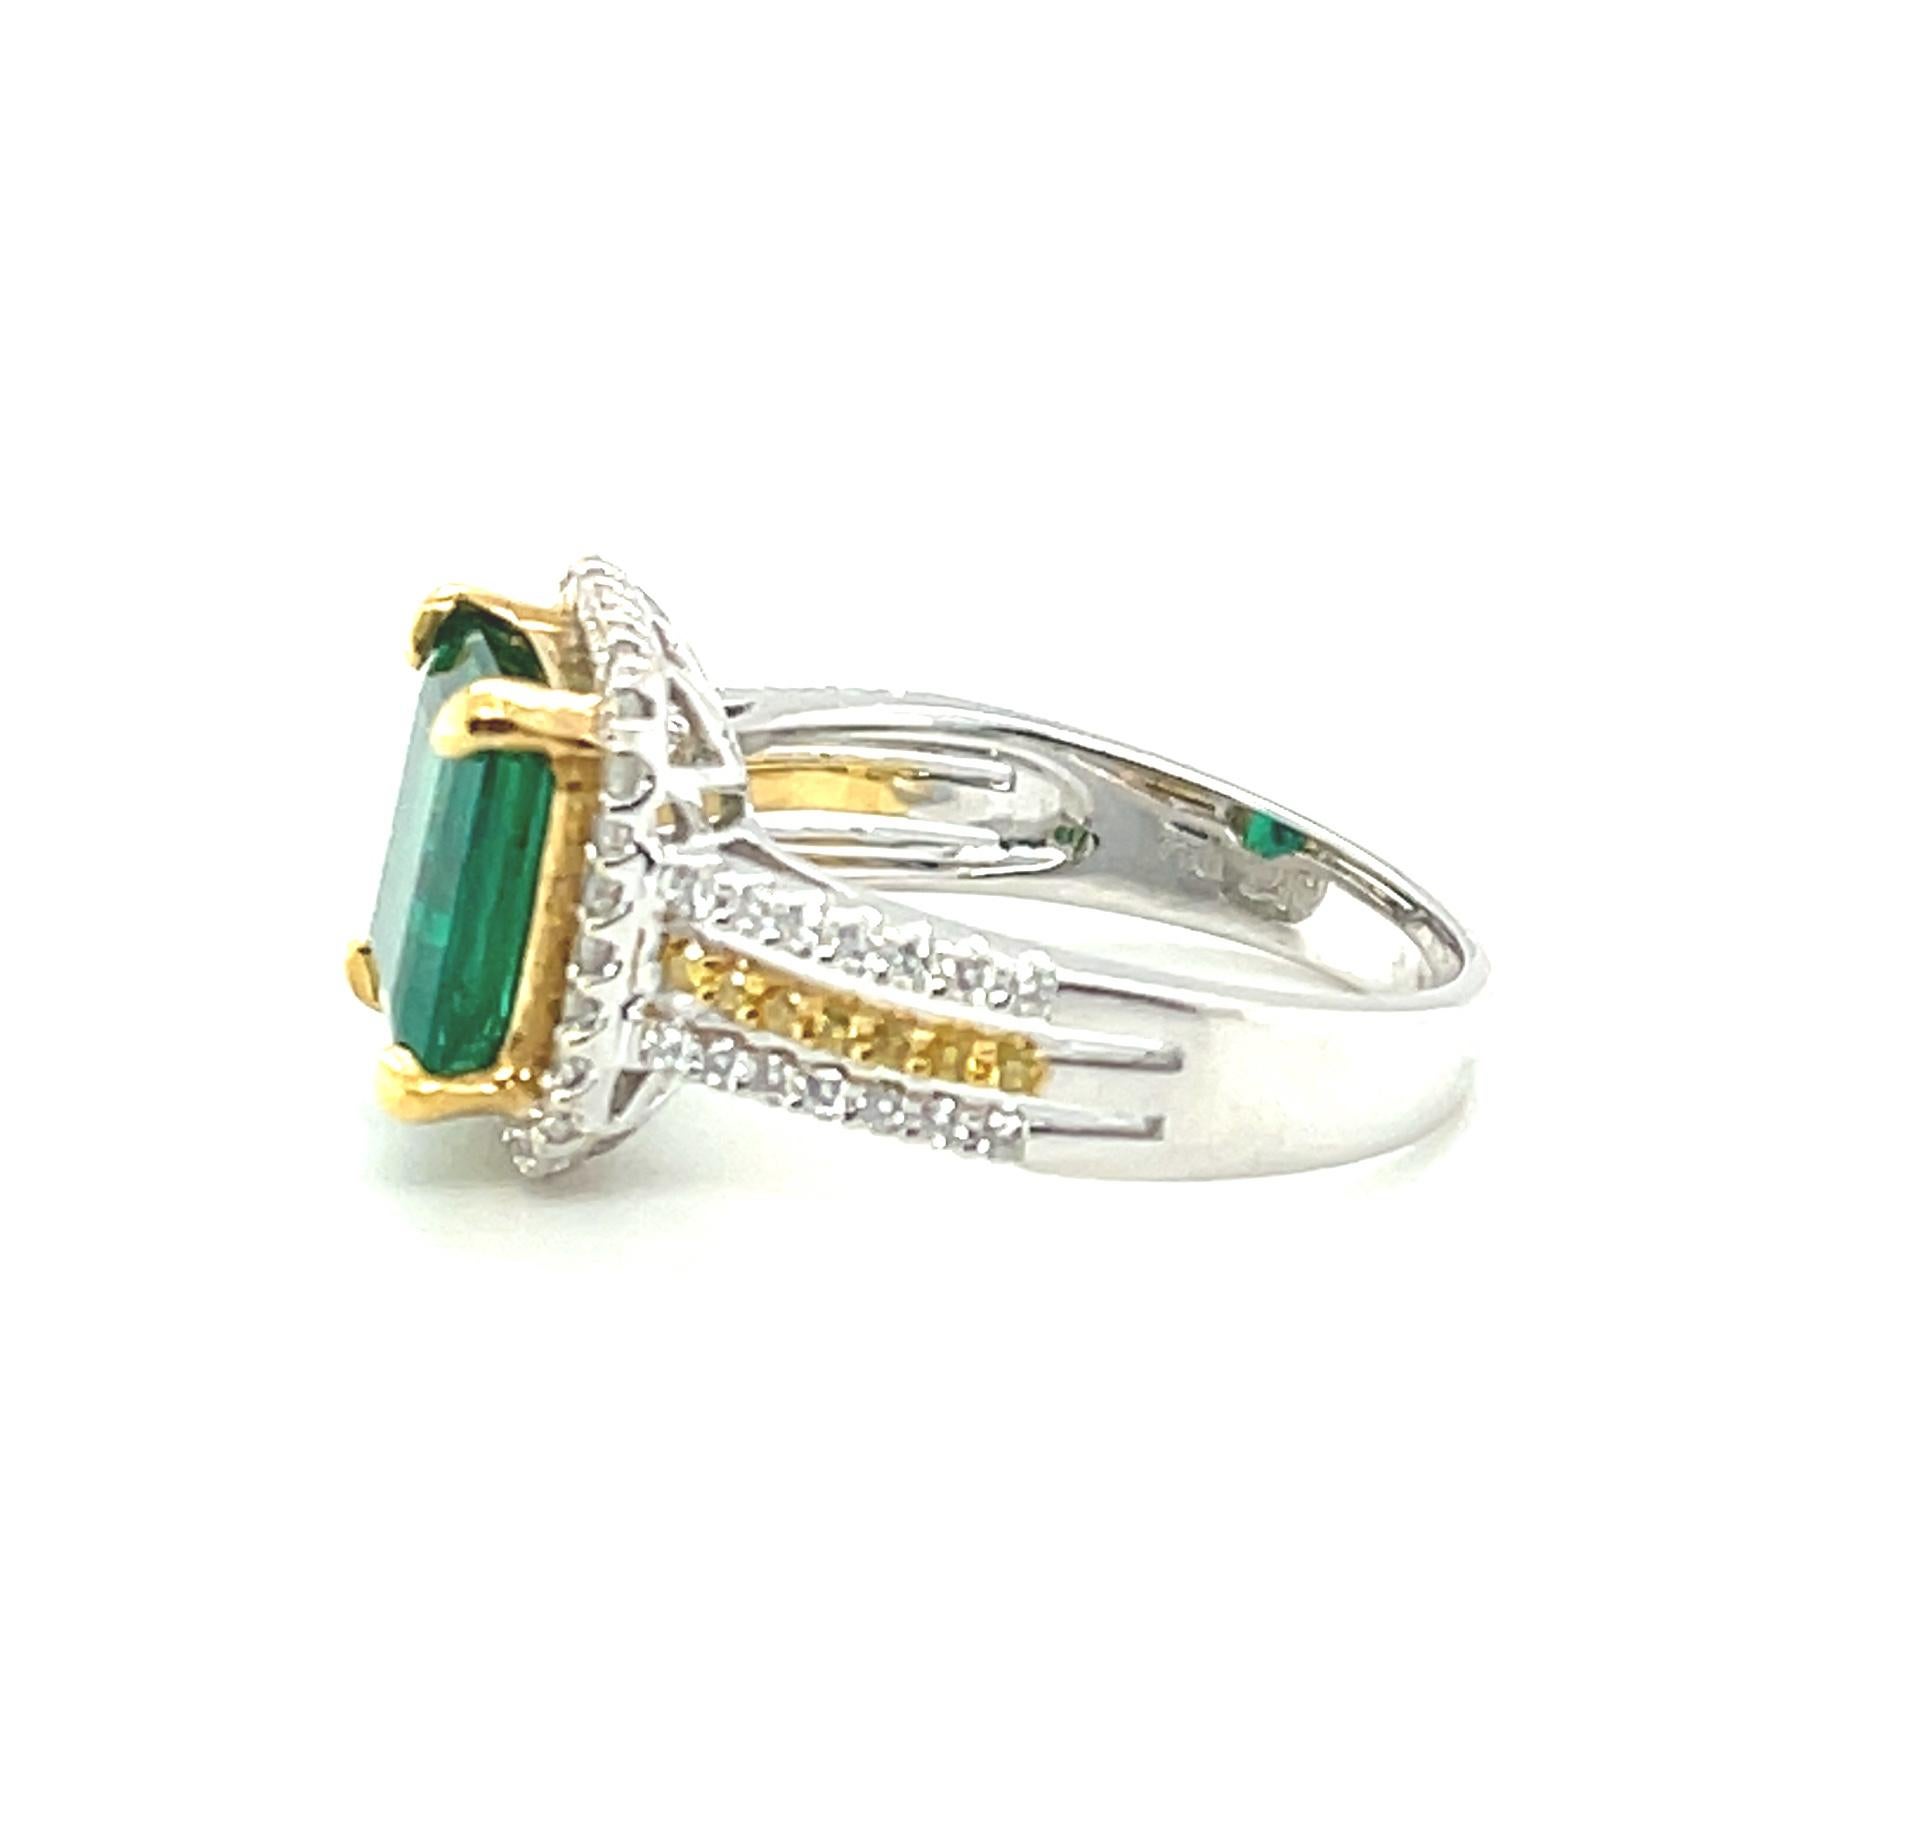 Women's or Men's 2.85 Carat Emerald Cocktail Ring with Canary and White Diamonds in 18k Gold For Sale